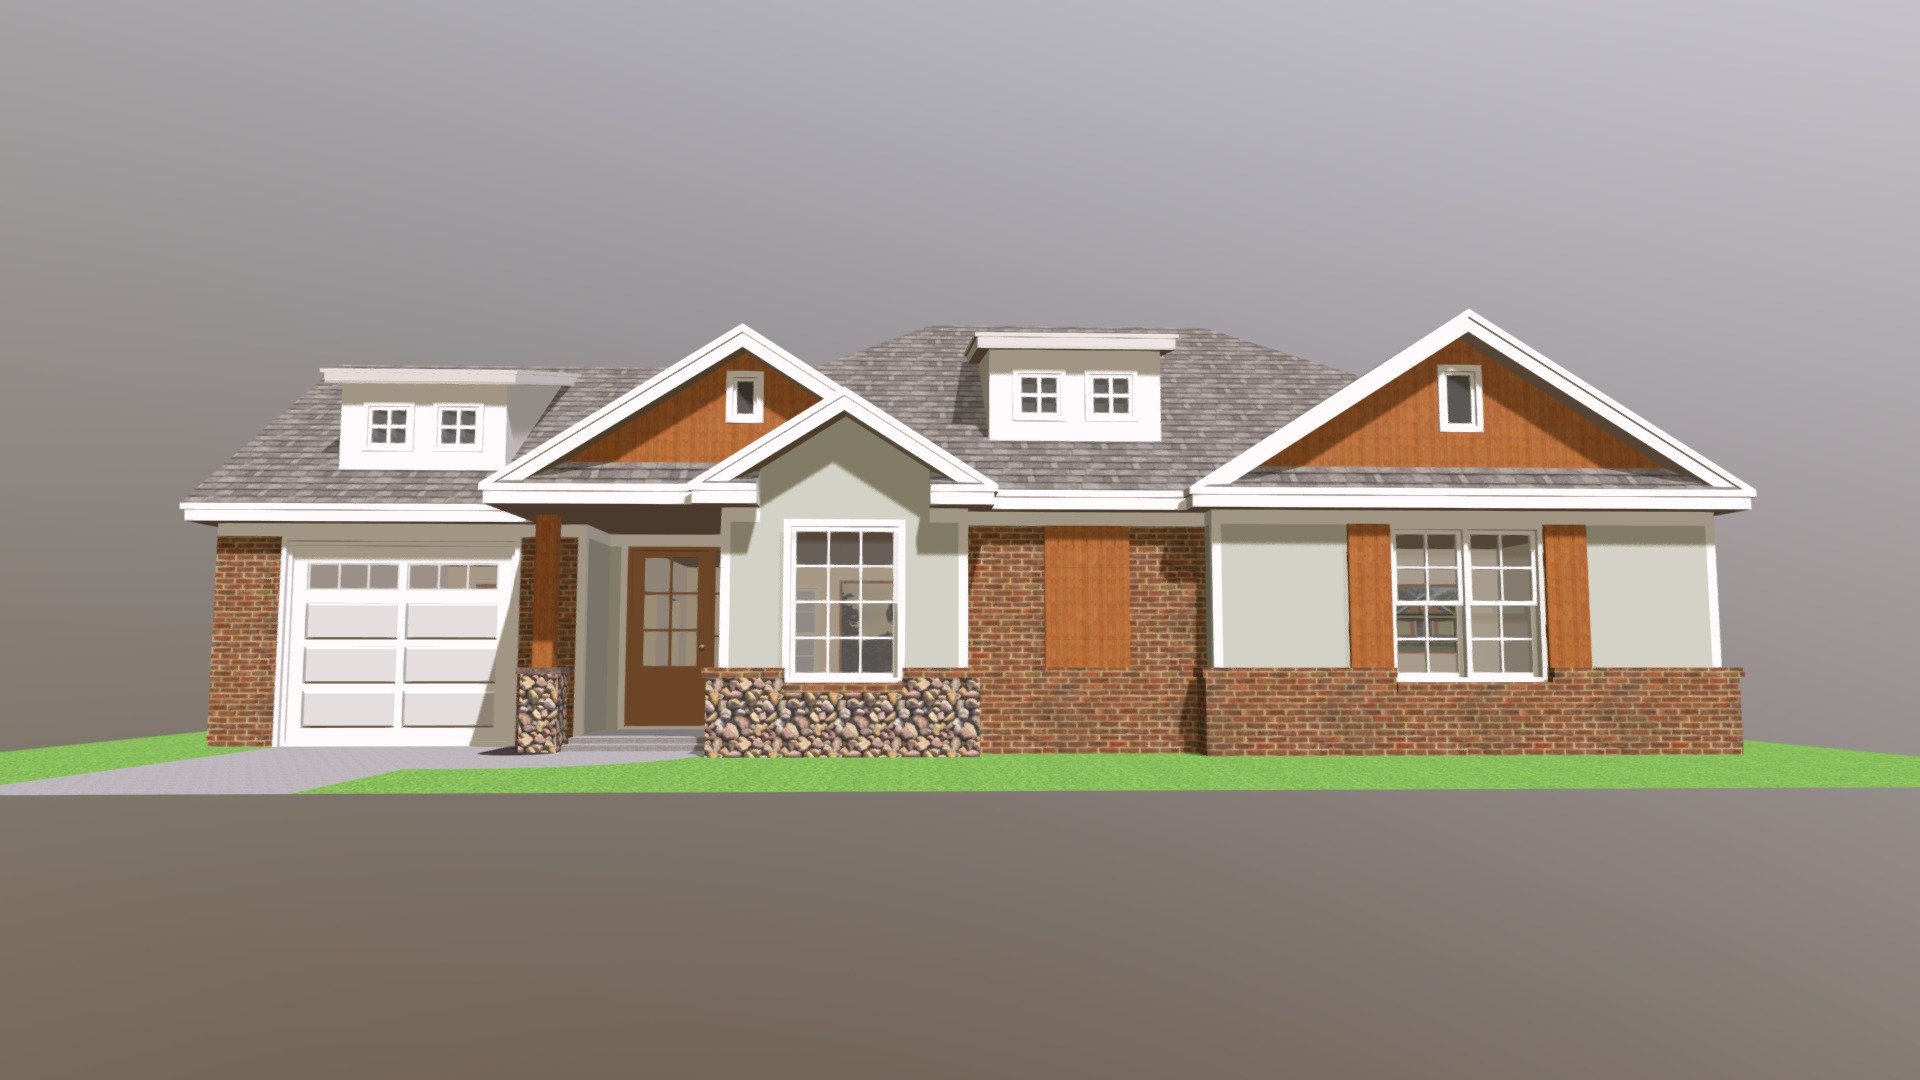 Ranch-Style House - Ranch-Style House - Download Free 3D model by rcfranklin 3d model